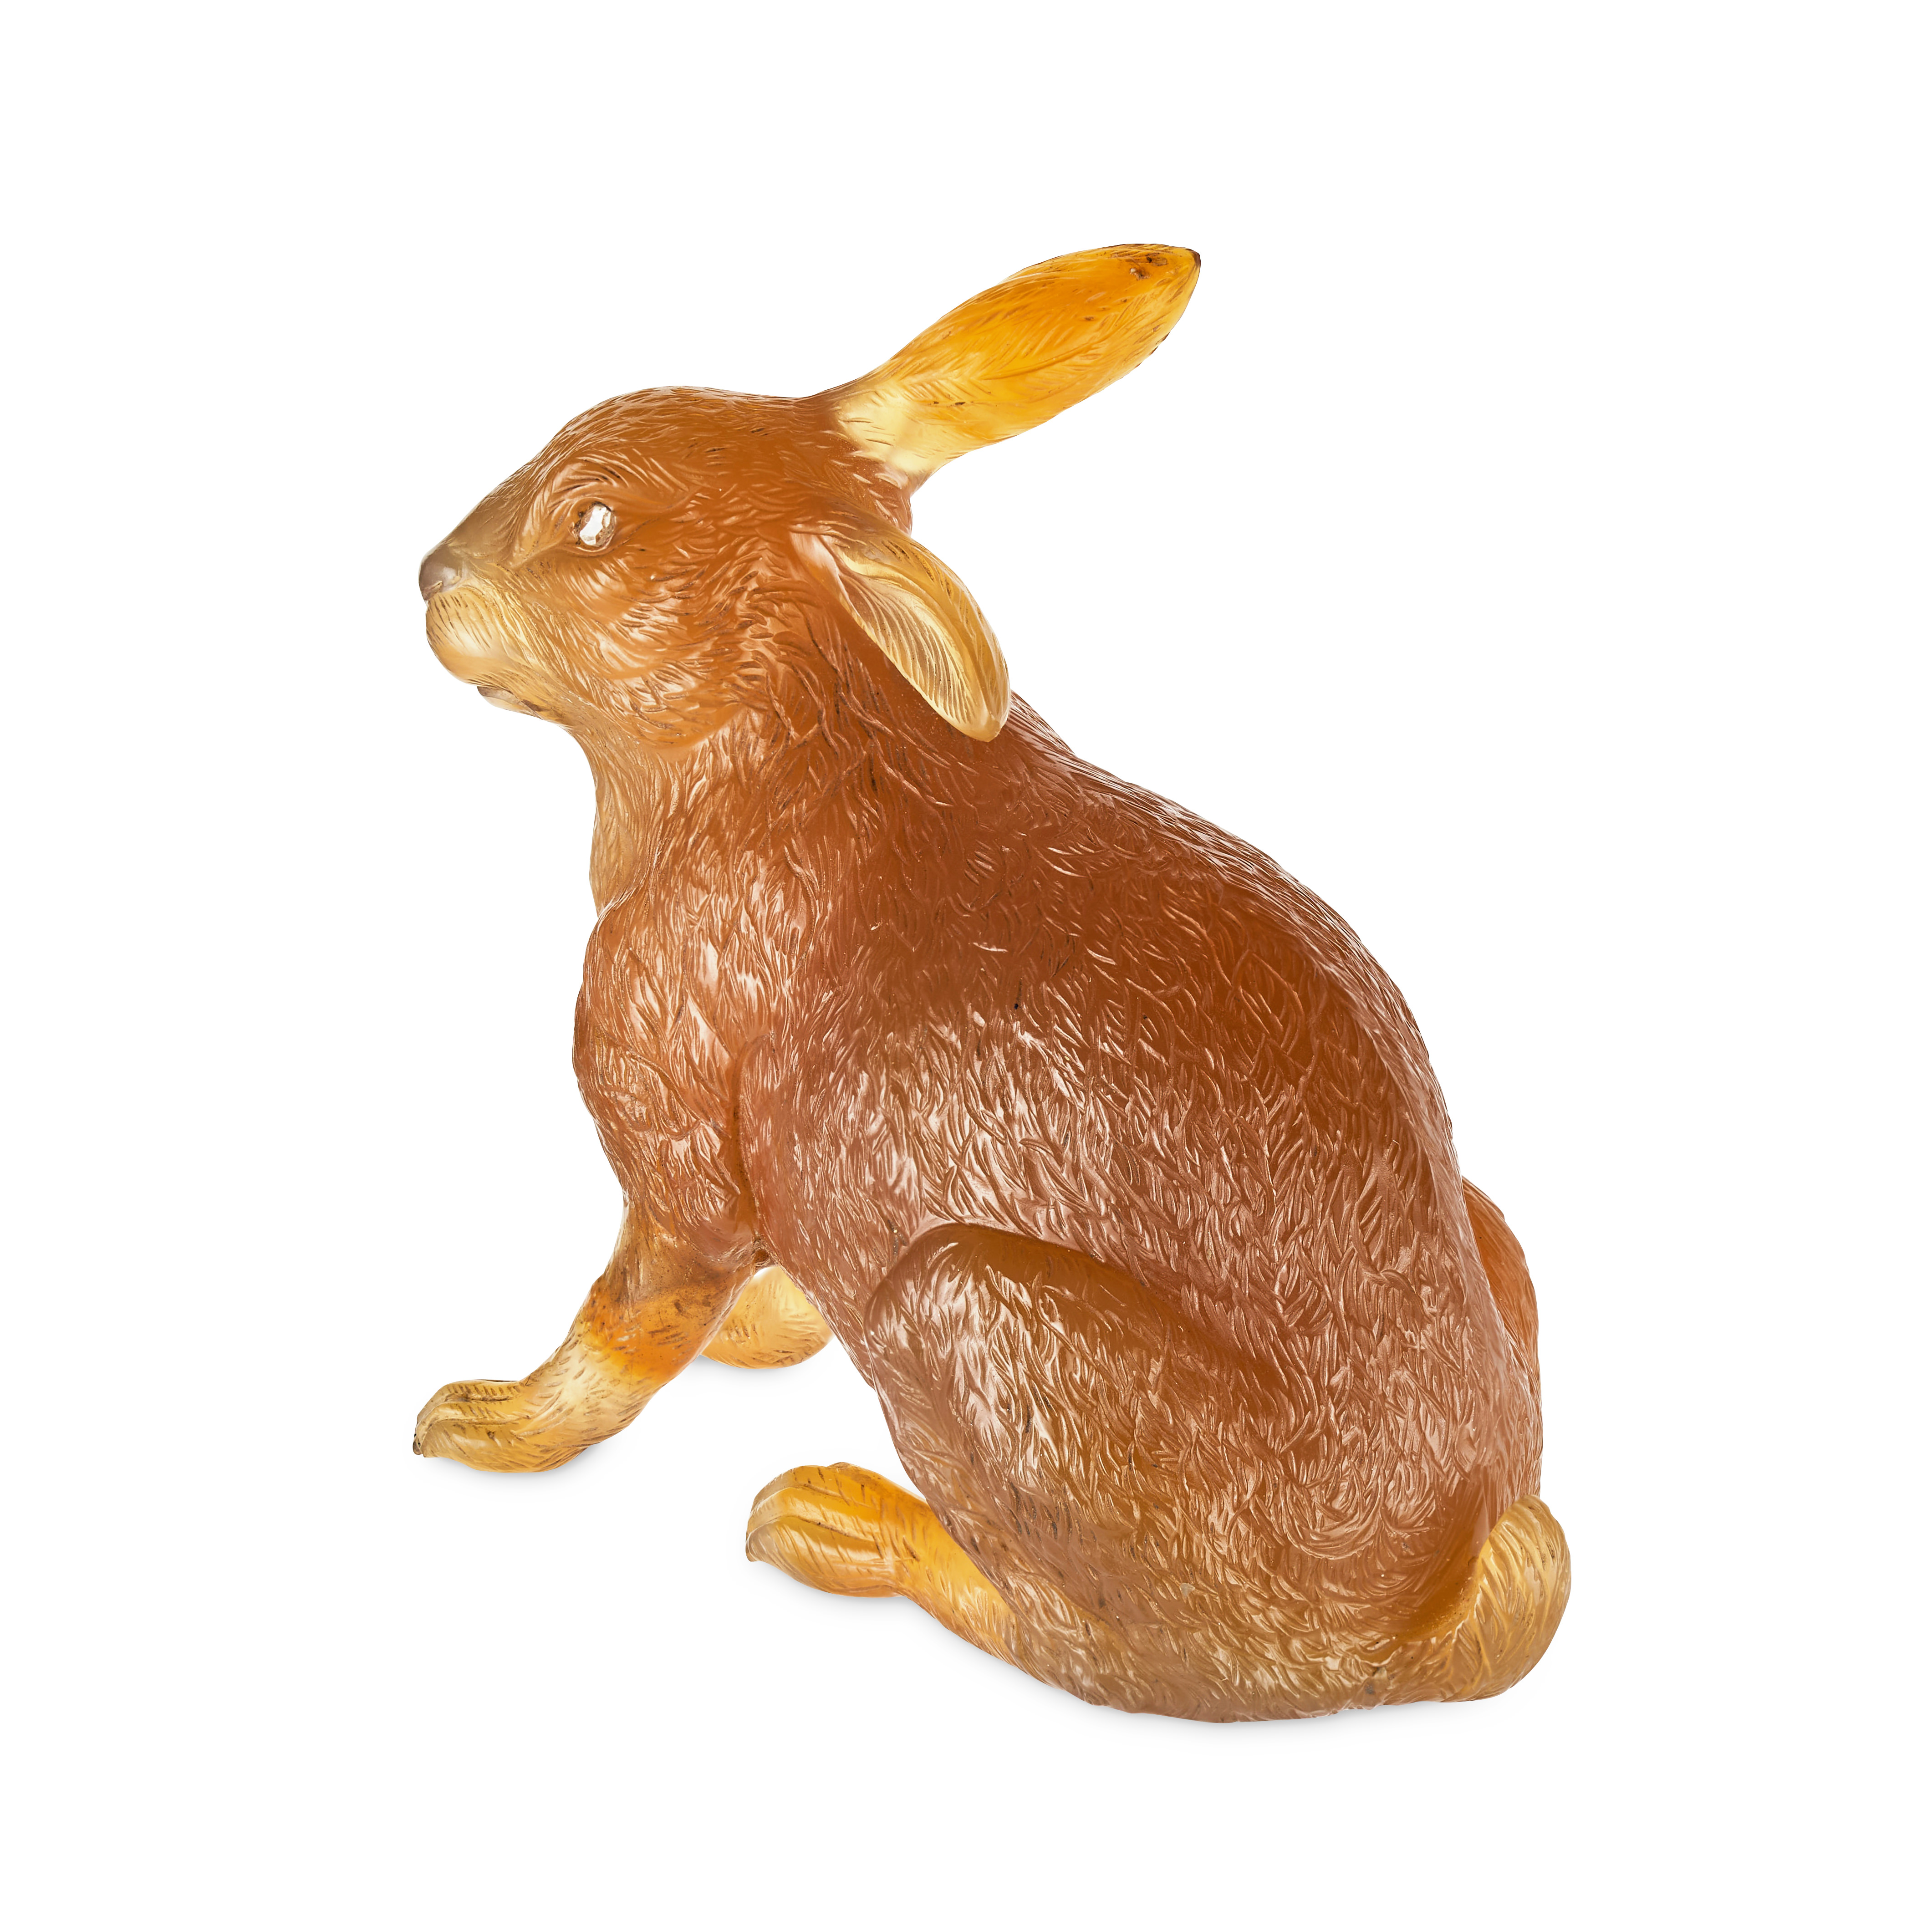 FABERGE, A JEWELLED AGATE FIGURE OF A HARE / LEVERETT, ST PETERSBURG, CIRCA 1900 - Image 3 of 10